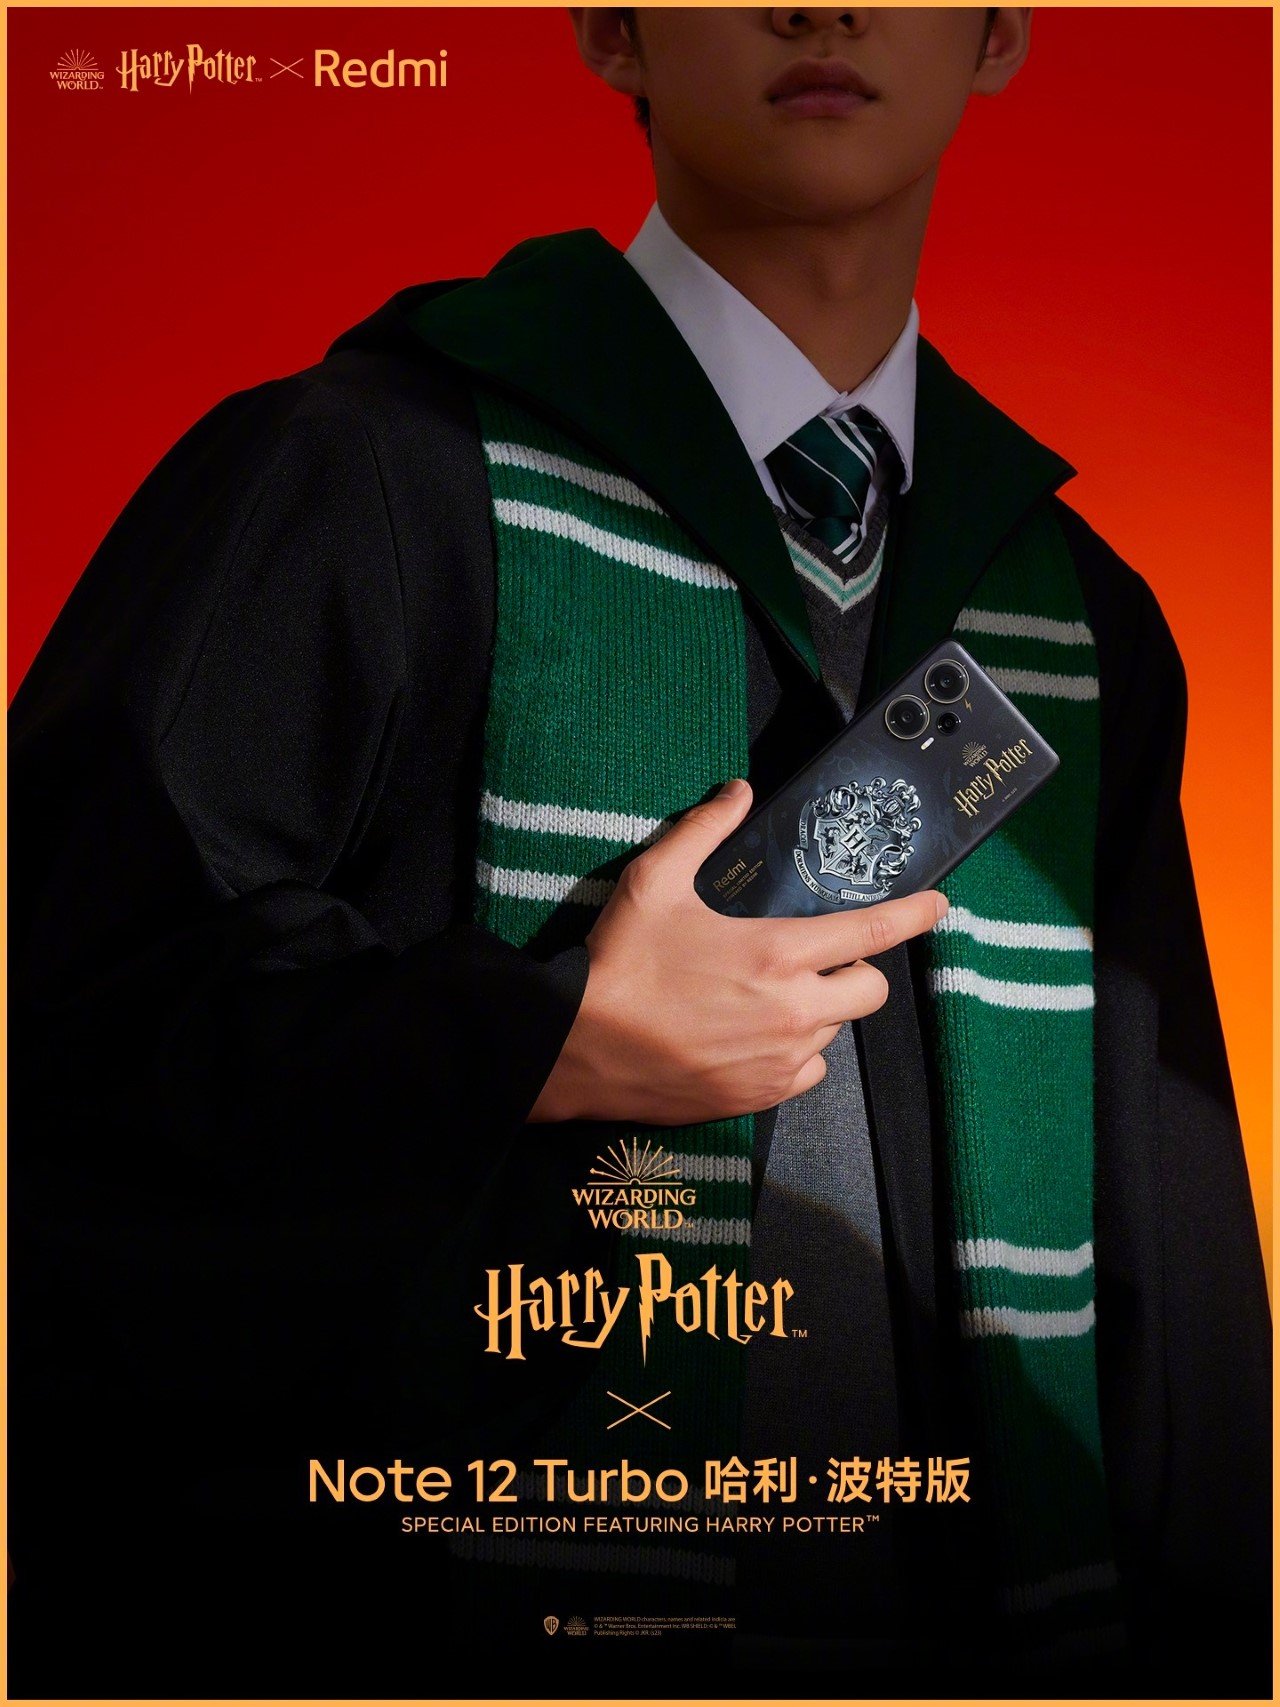 Redmi teases 'Harry Potter' edition of the Note 12 Turbo phone